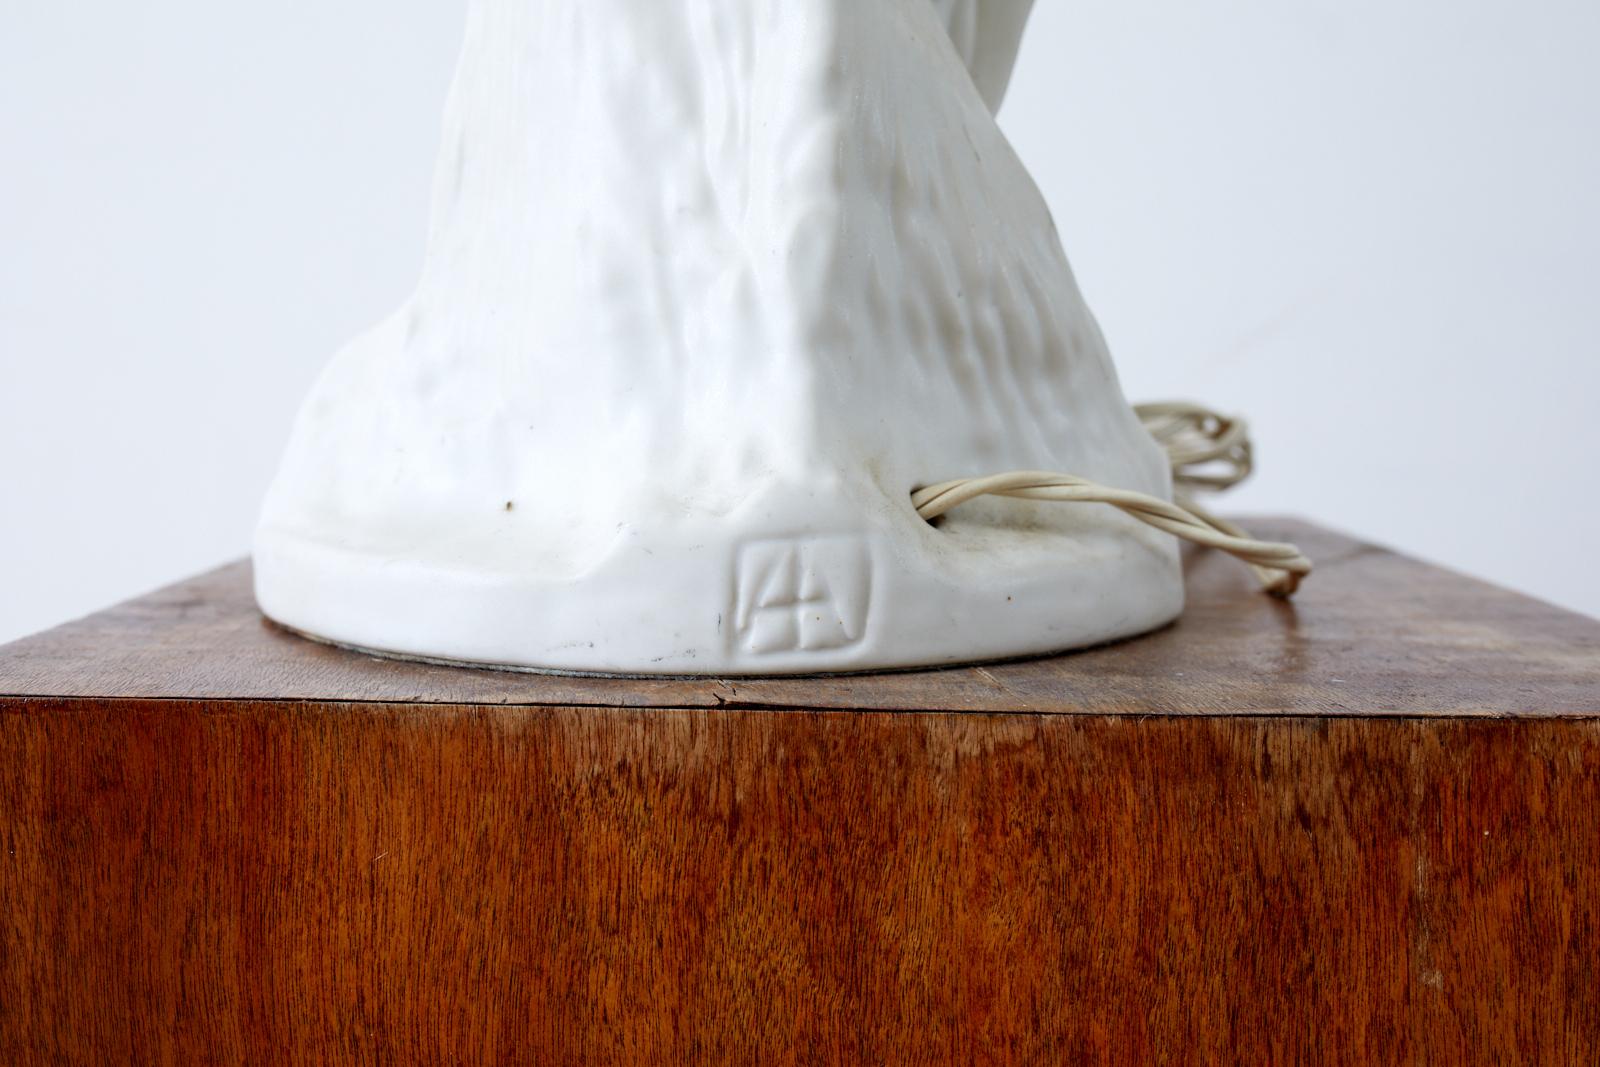 Van Briggle Figural Sculpture Porcelain Table Lamp In Good Condition For Sale In Rio Vista, CA